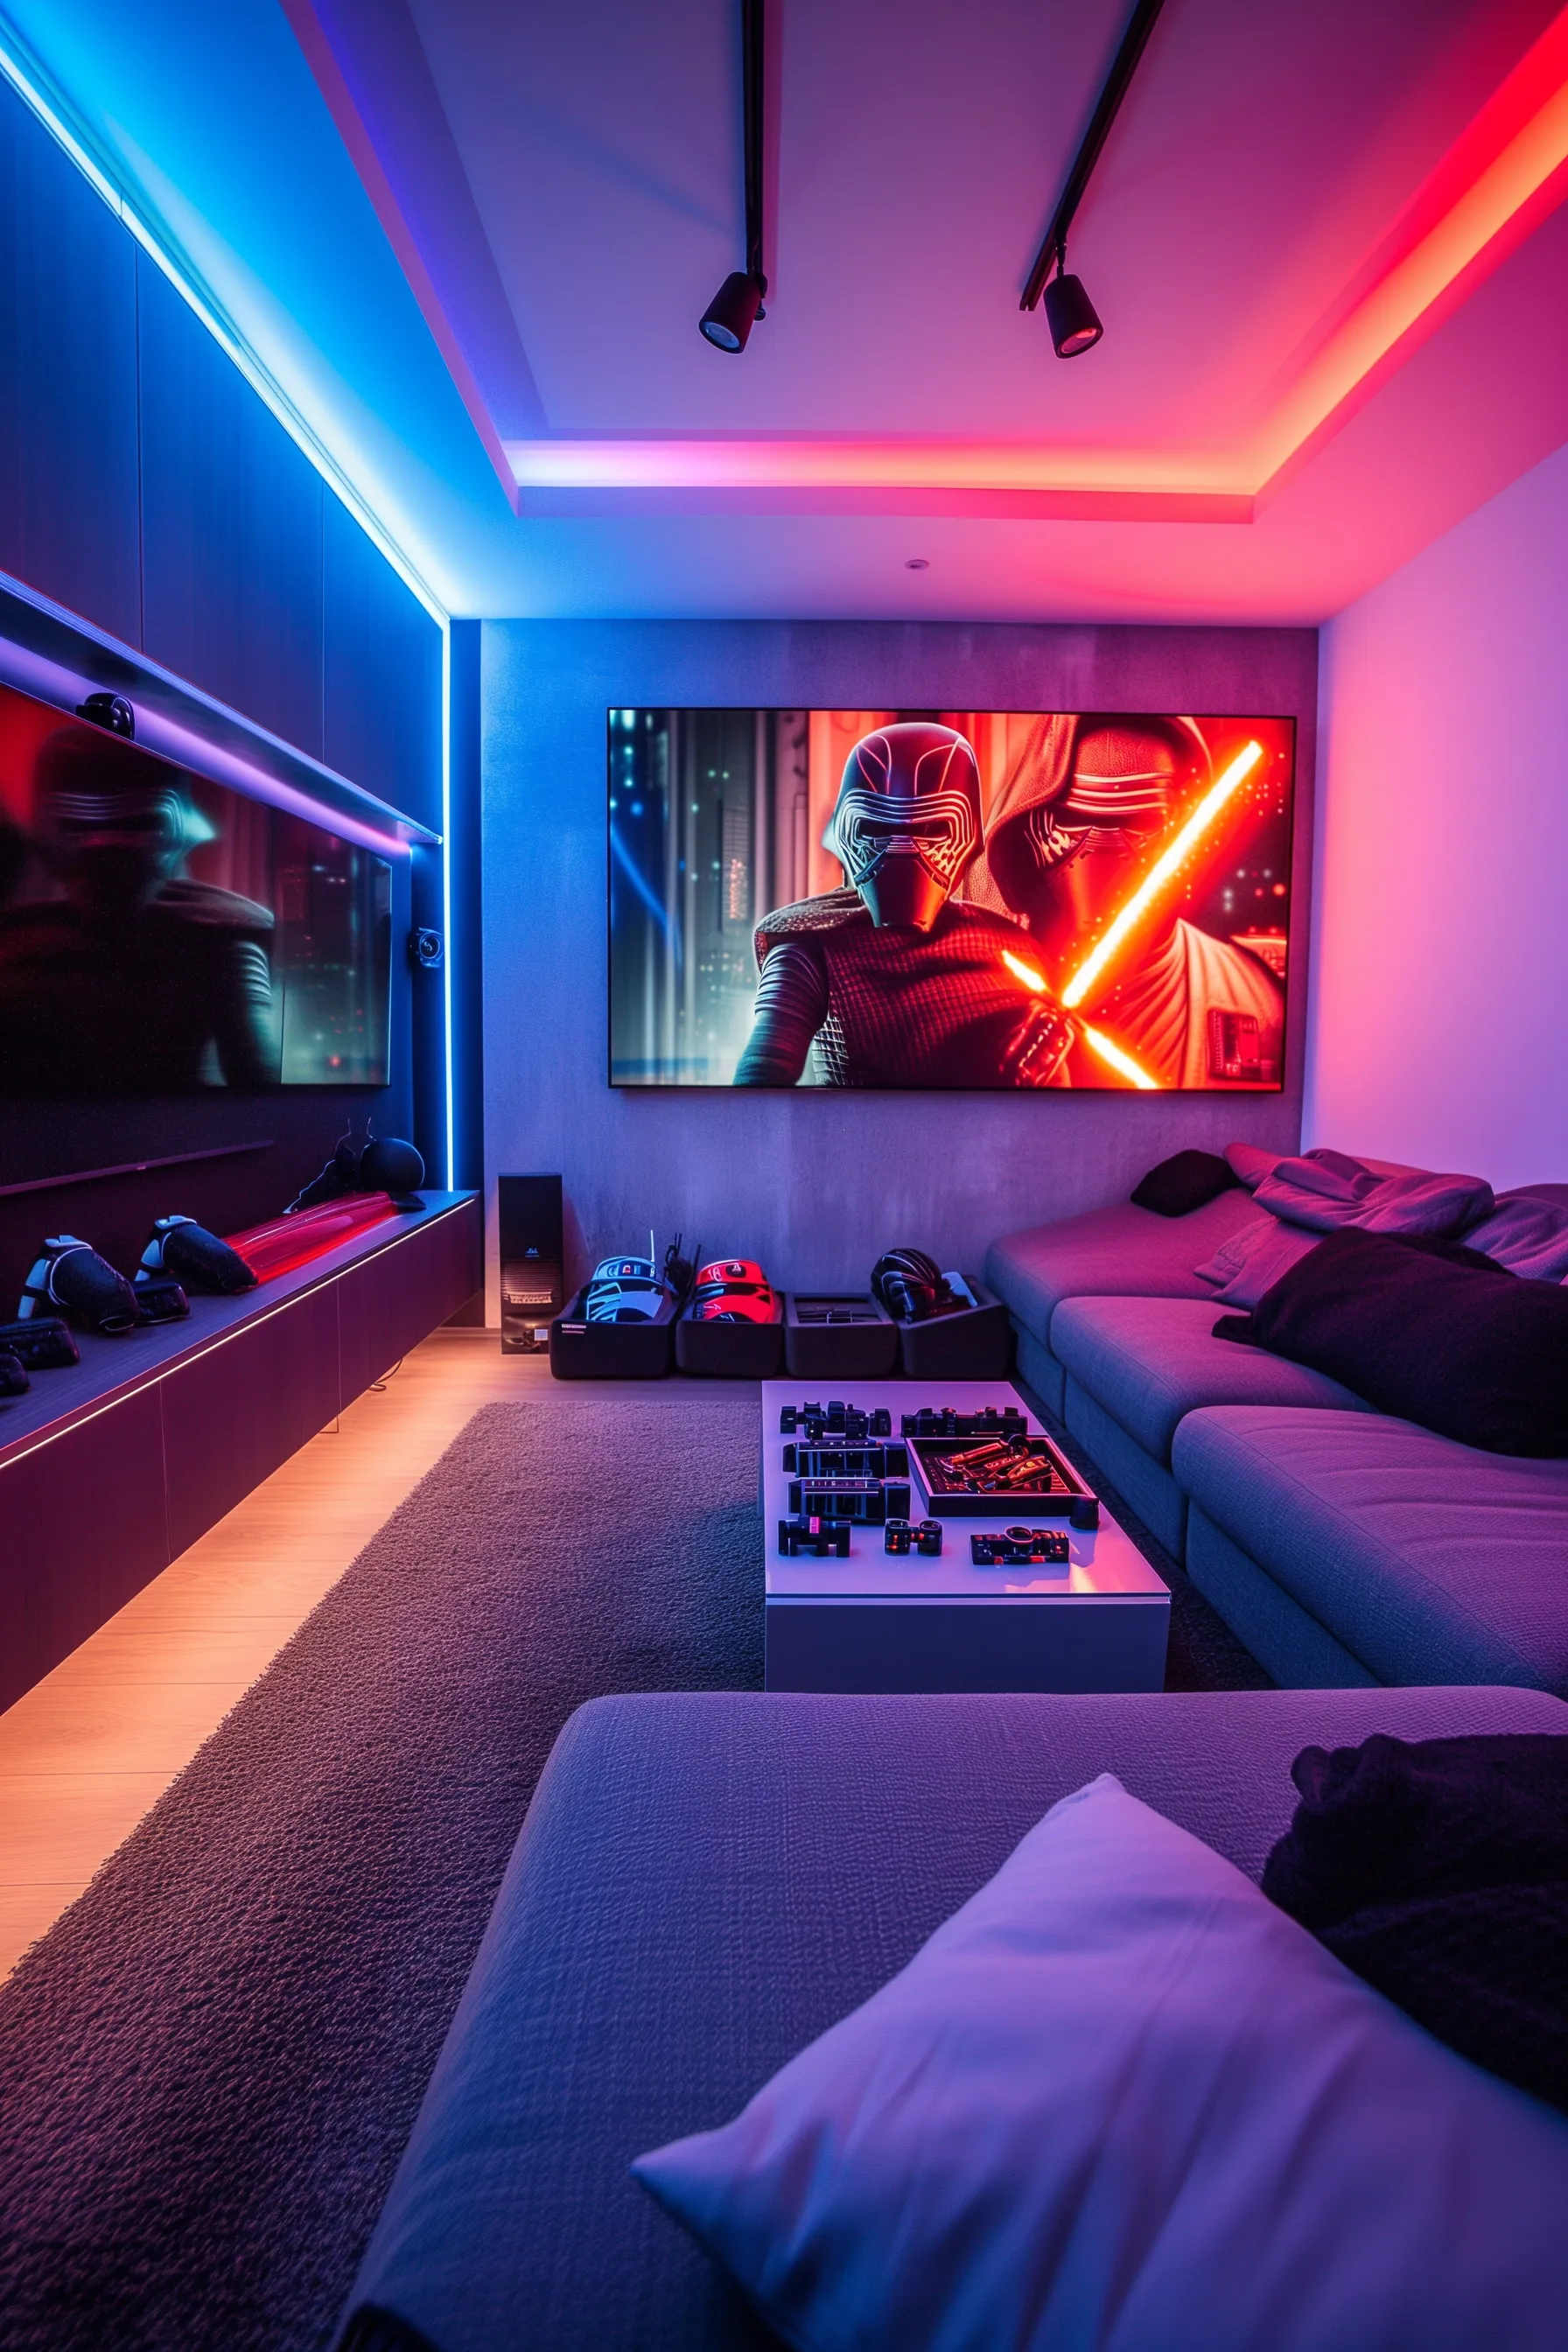 A star wars game room with a gray couch and consoles